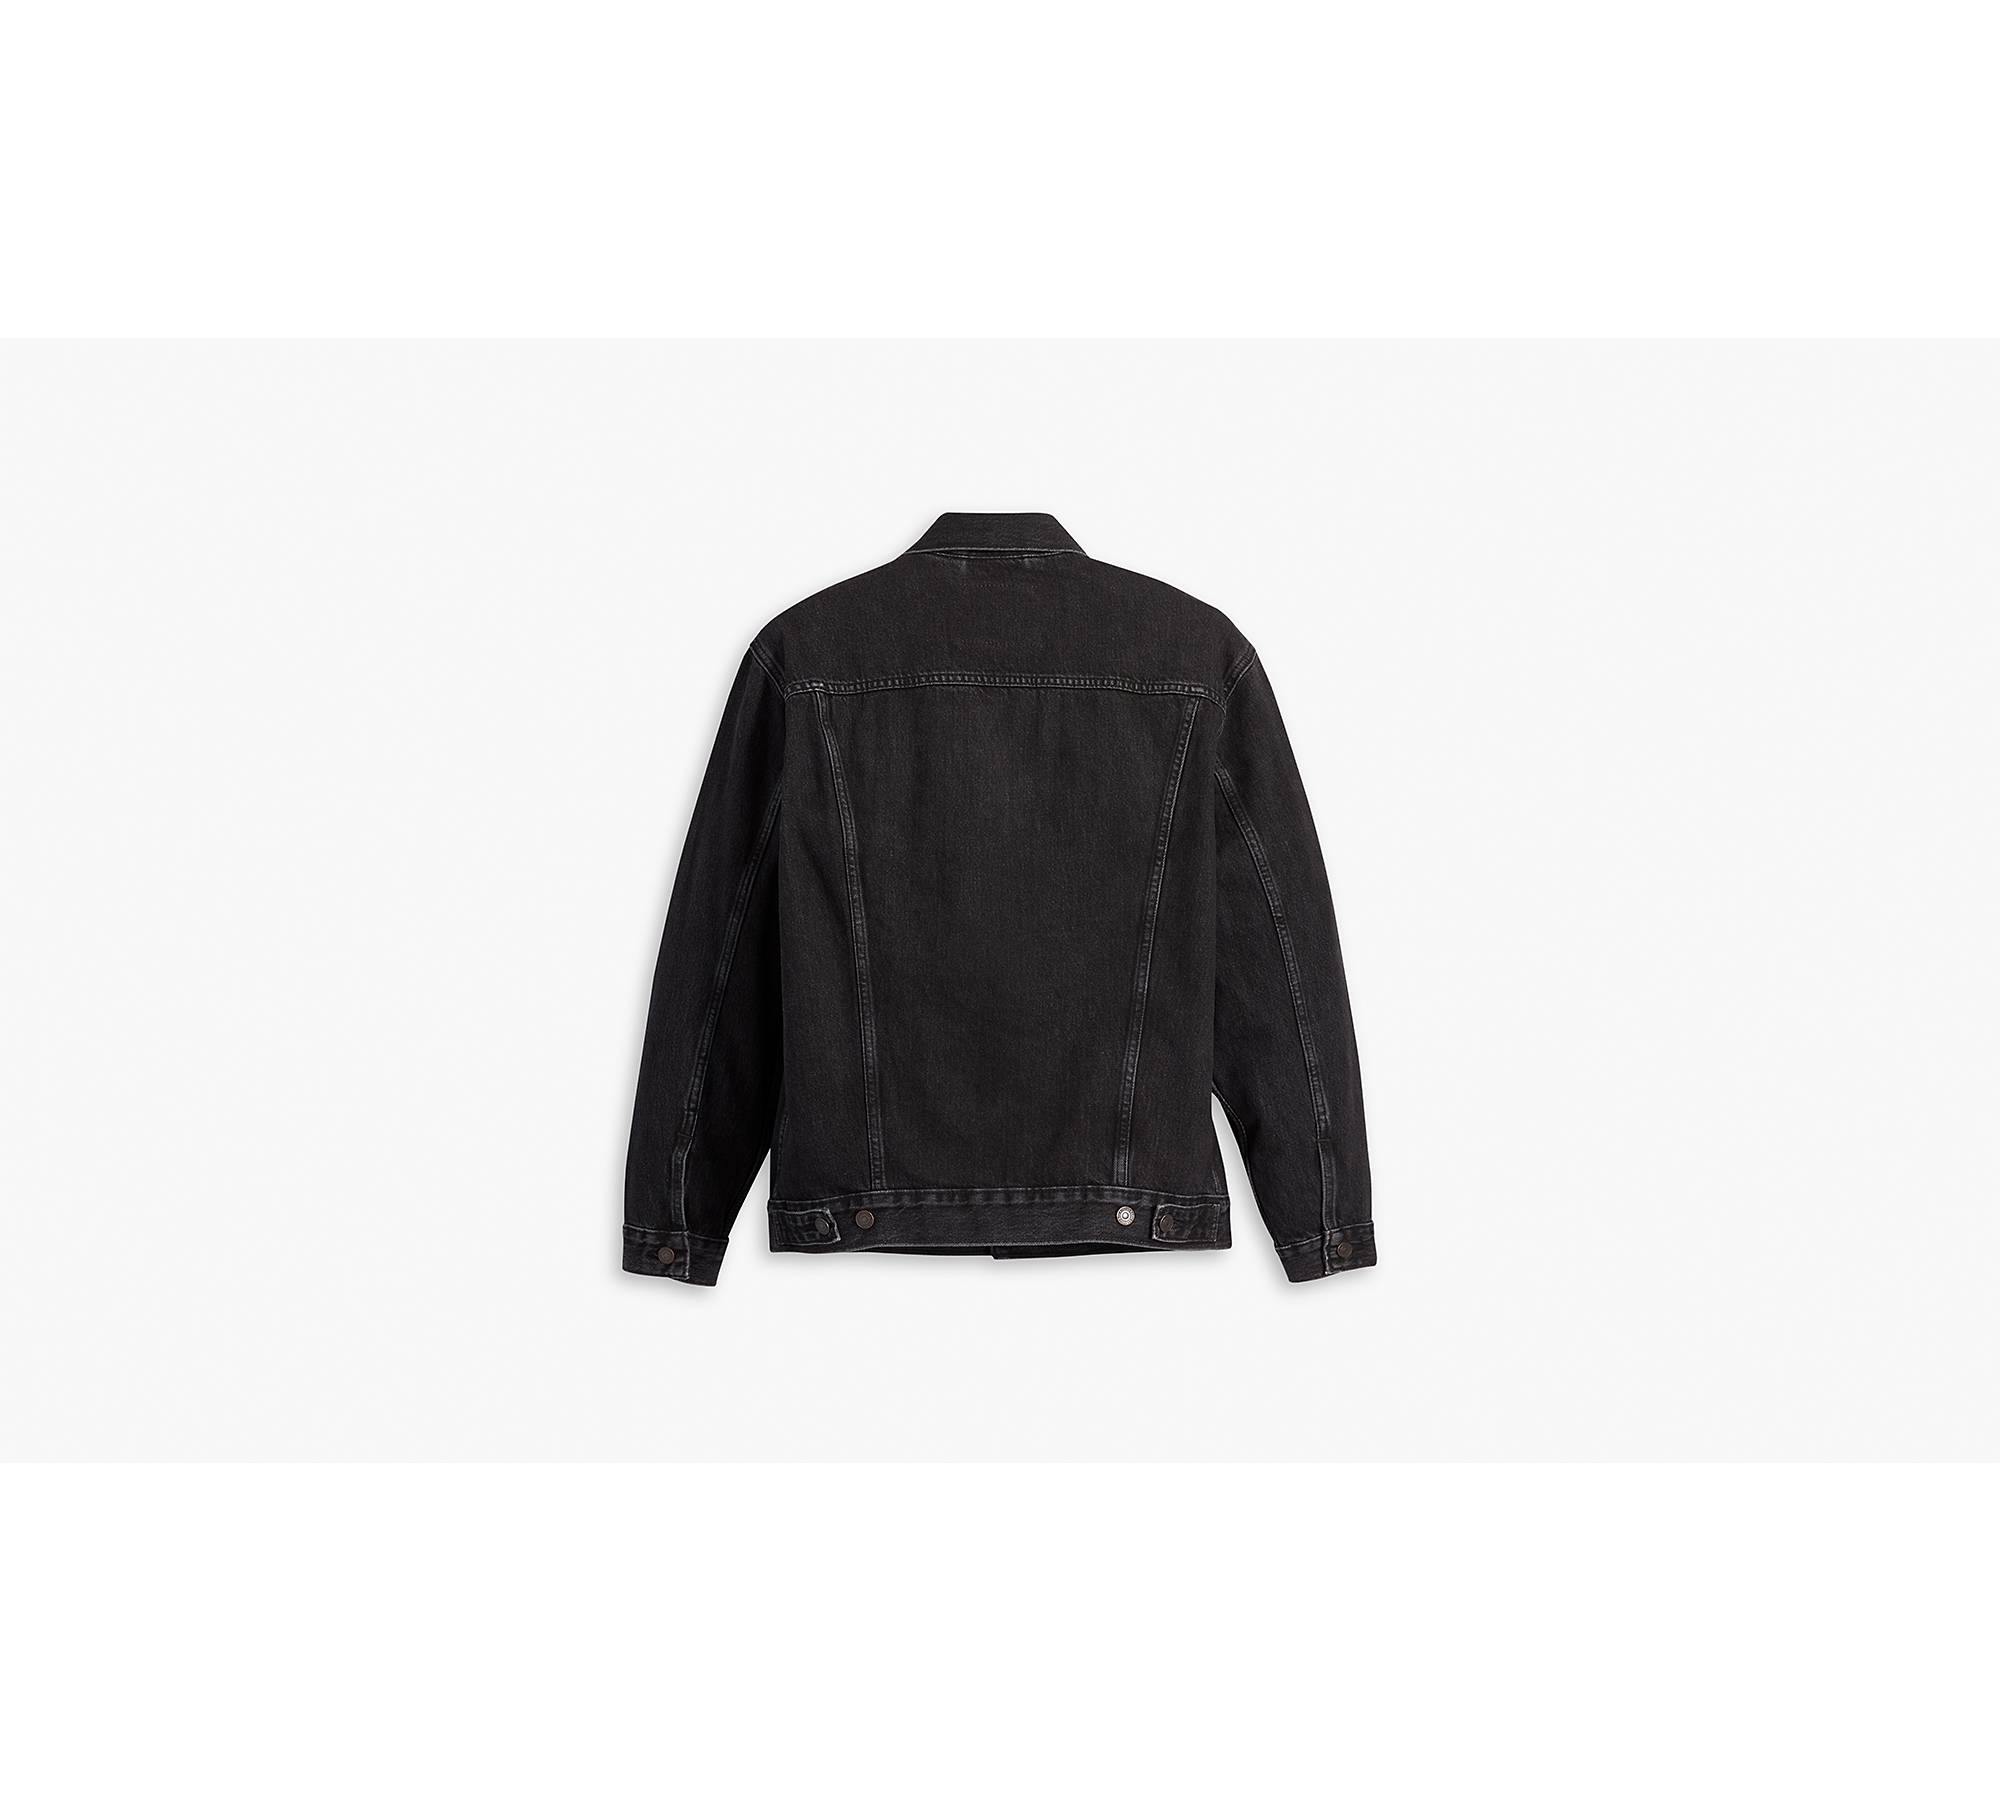 Relaxed Fit Trucker Jacket - Black | Levi's® US